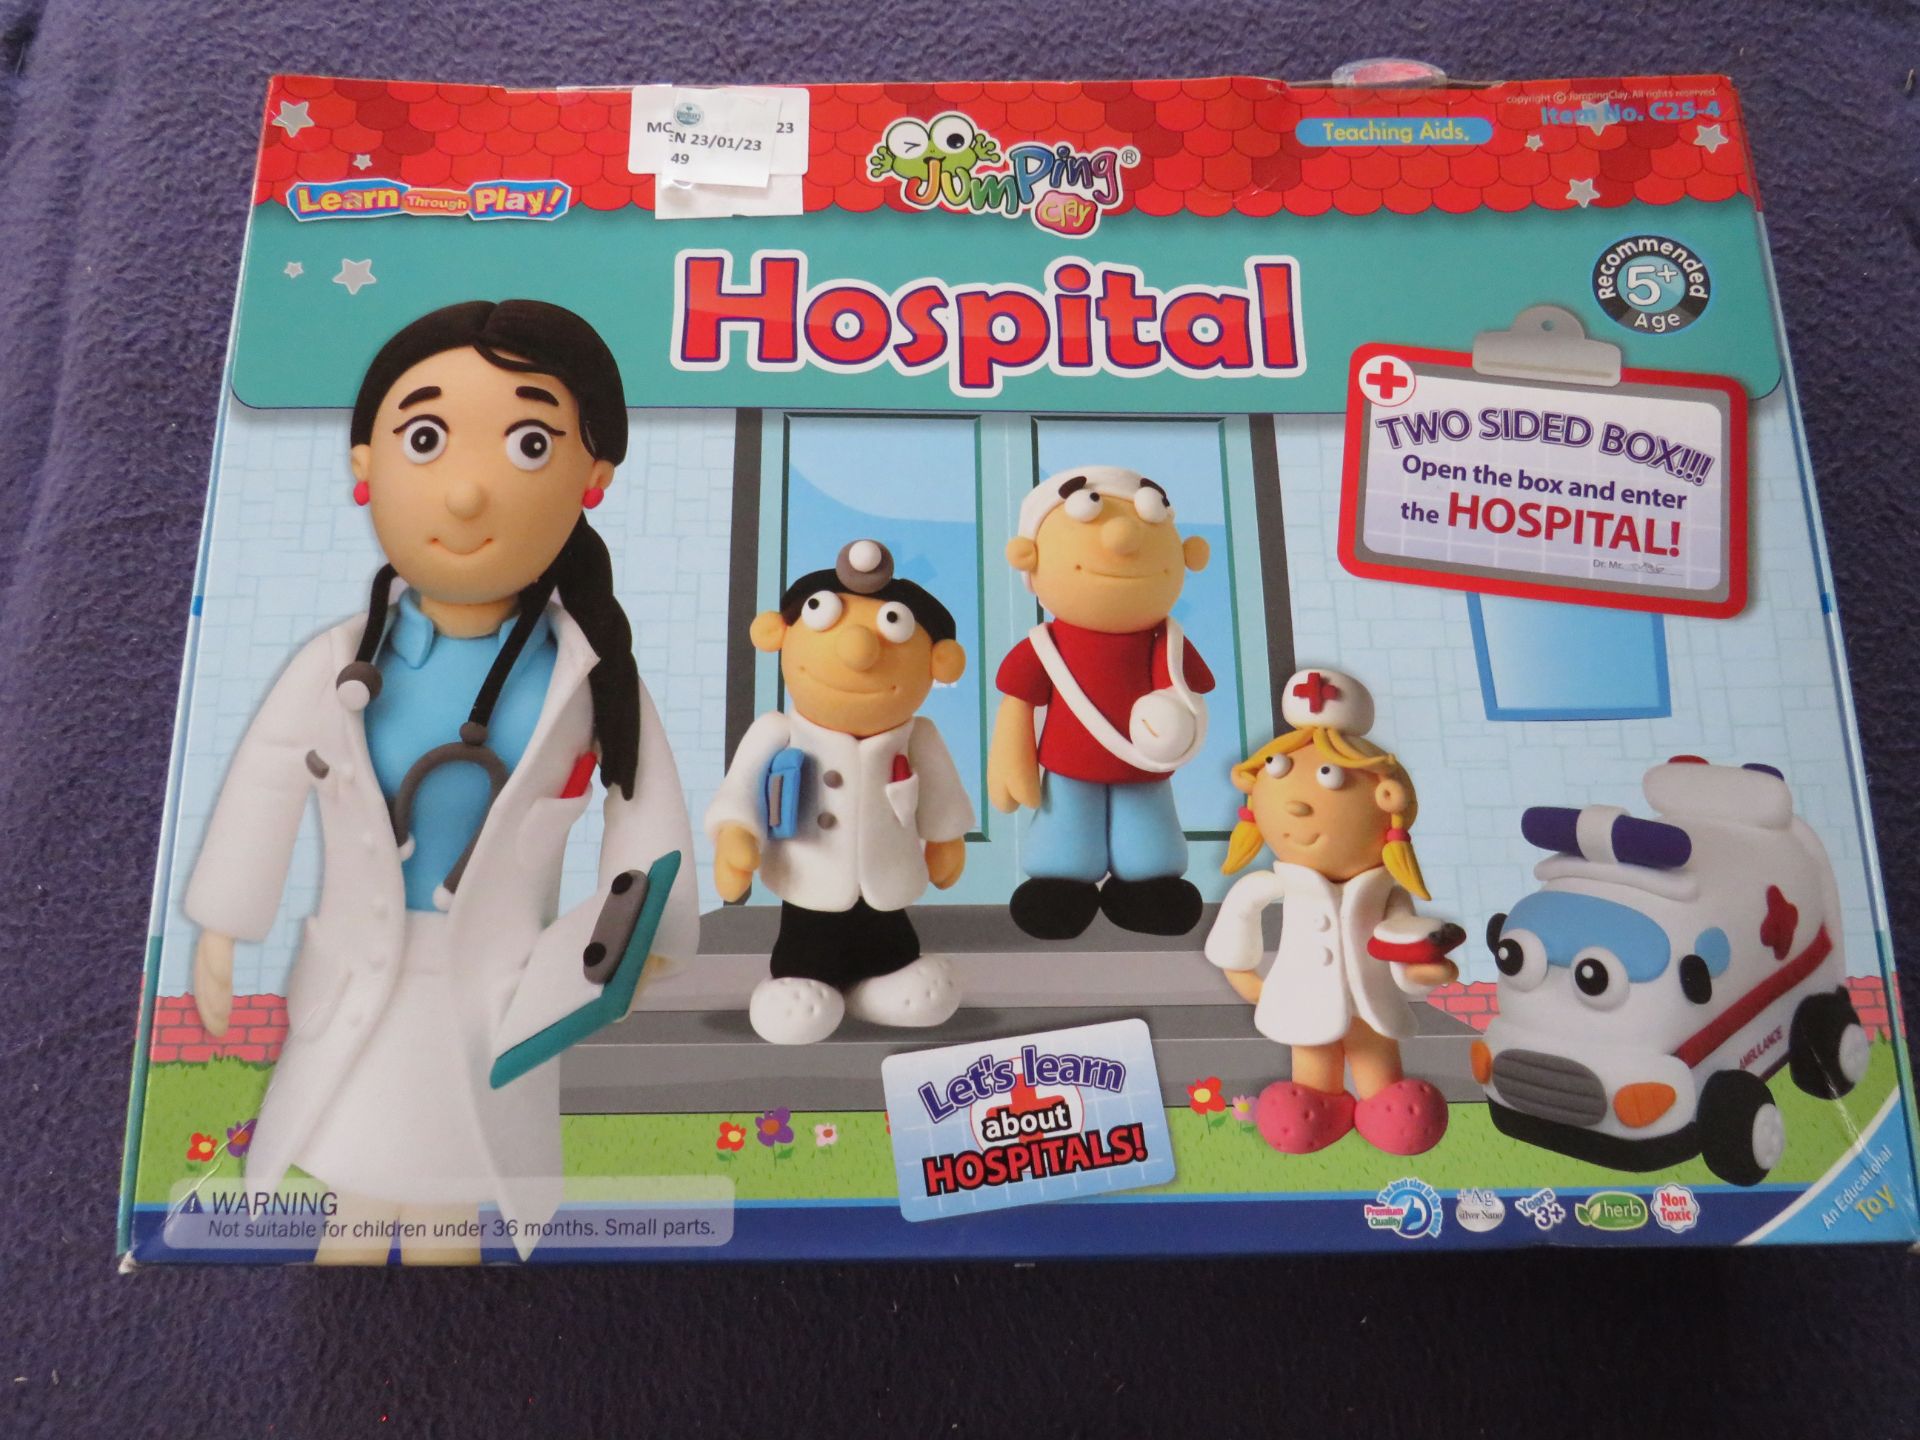 Jumping Clay - Hospital Set - Unchecked & Boxed.